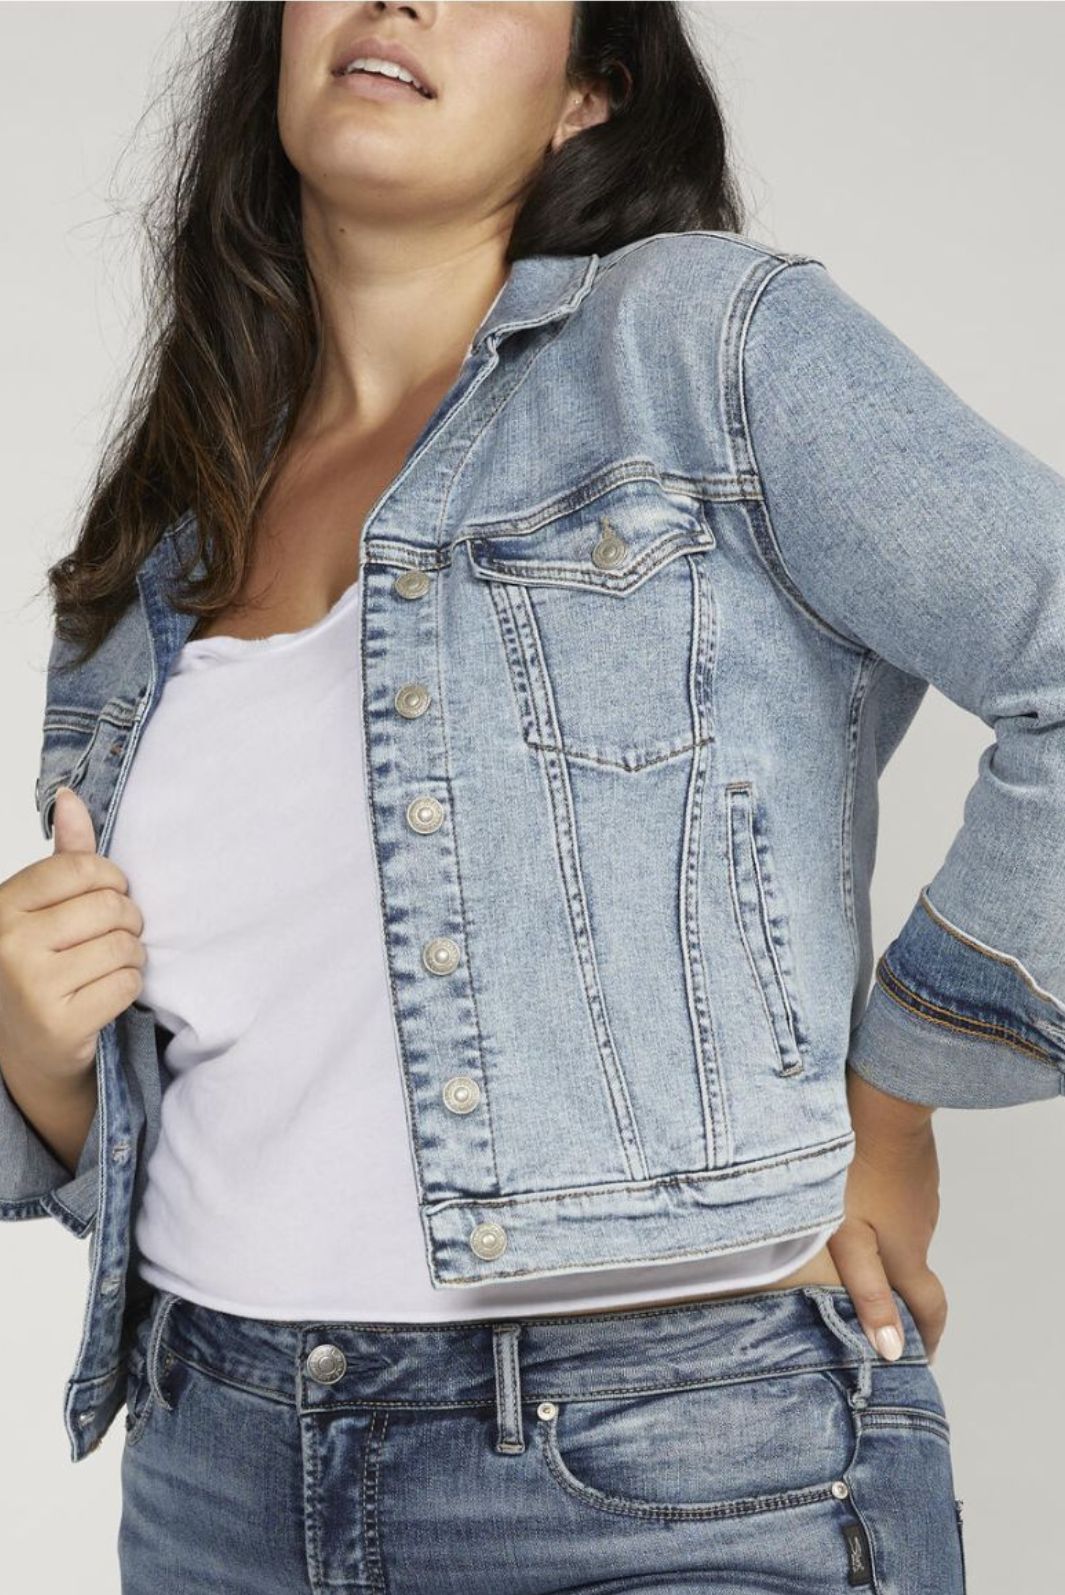 Silver Jeans Plus Size Fitted Denim Jacket